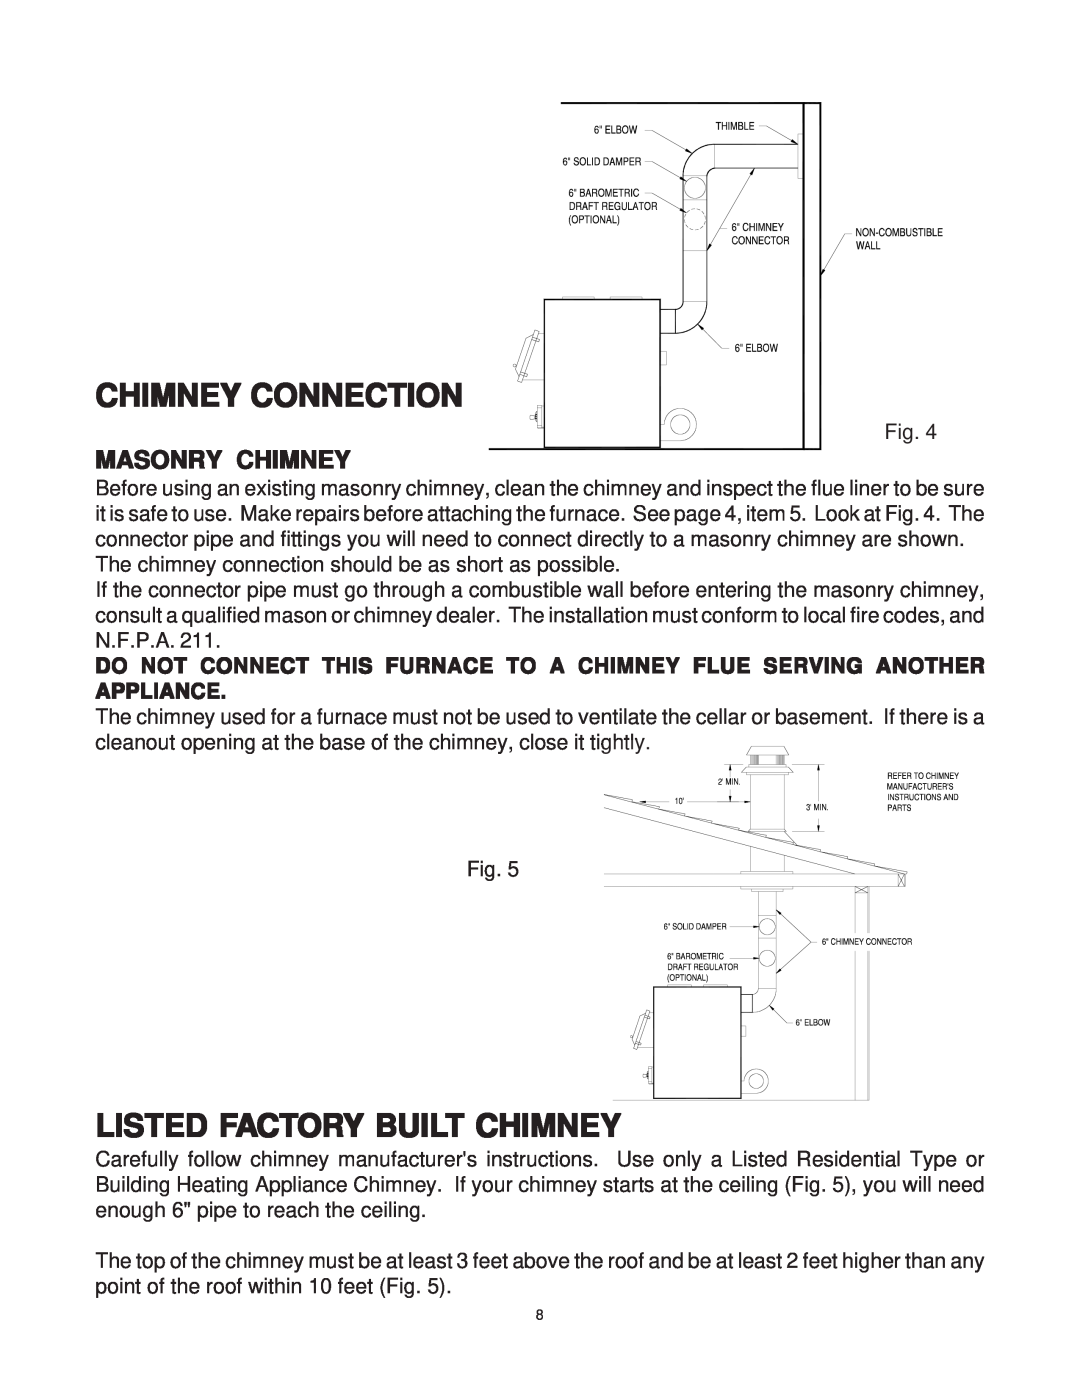 United States Stove 1537M owner manual Chimney Connection, Listed Factory Built Chimney, Masonry Chimney 